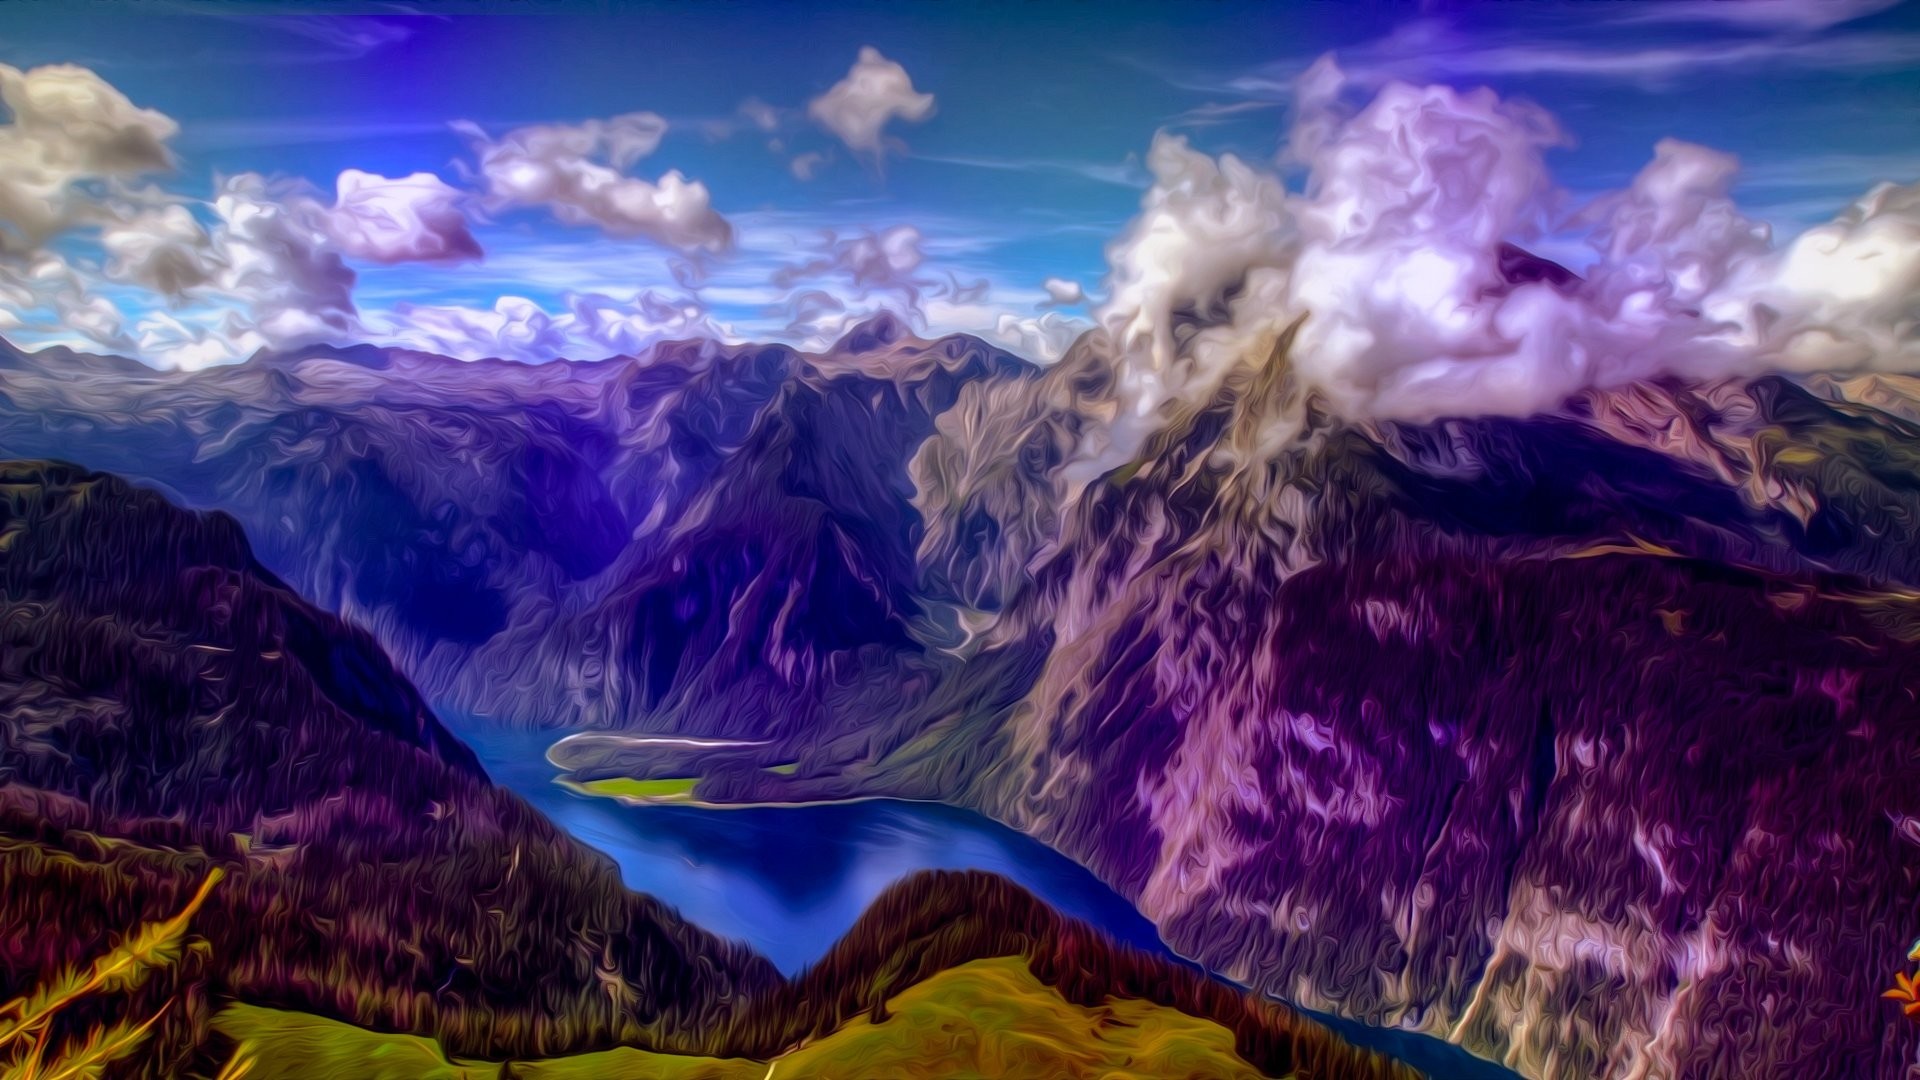 1920x1080, Mountains Landscape Nature Mountain Psychedelic - Trippy Nature Backgrounds - HD Wallpaper 